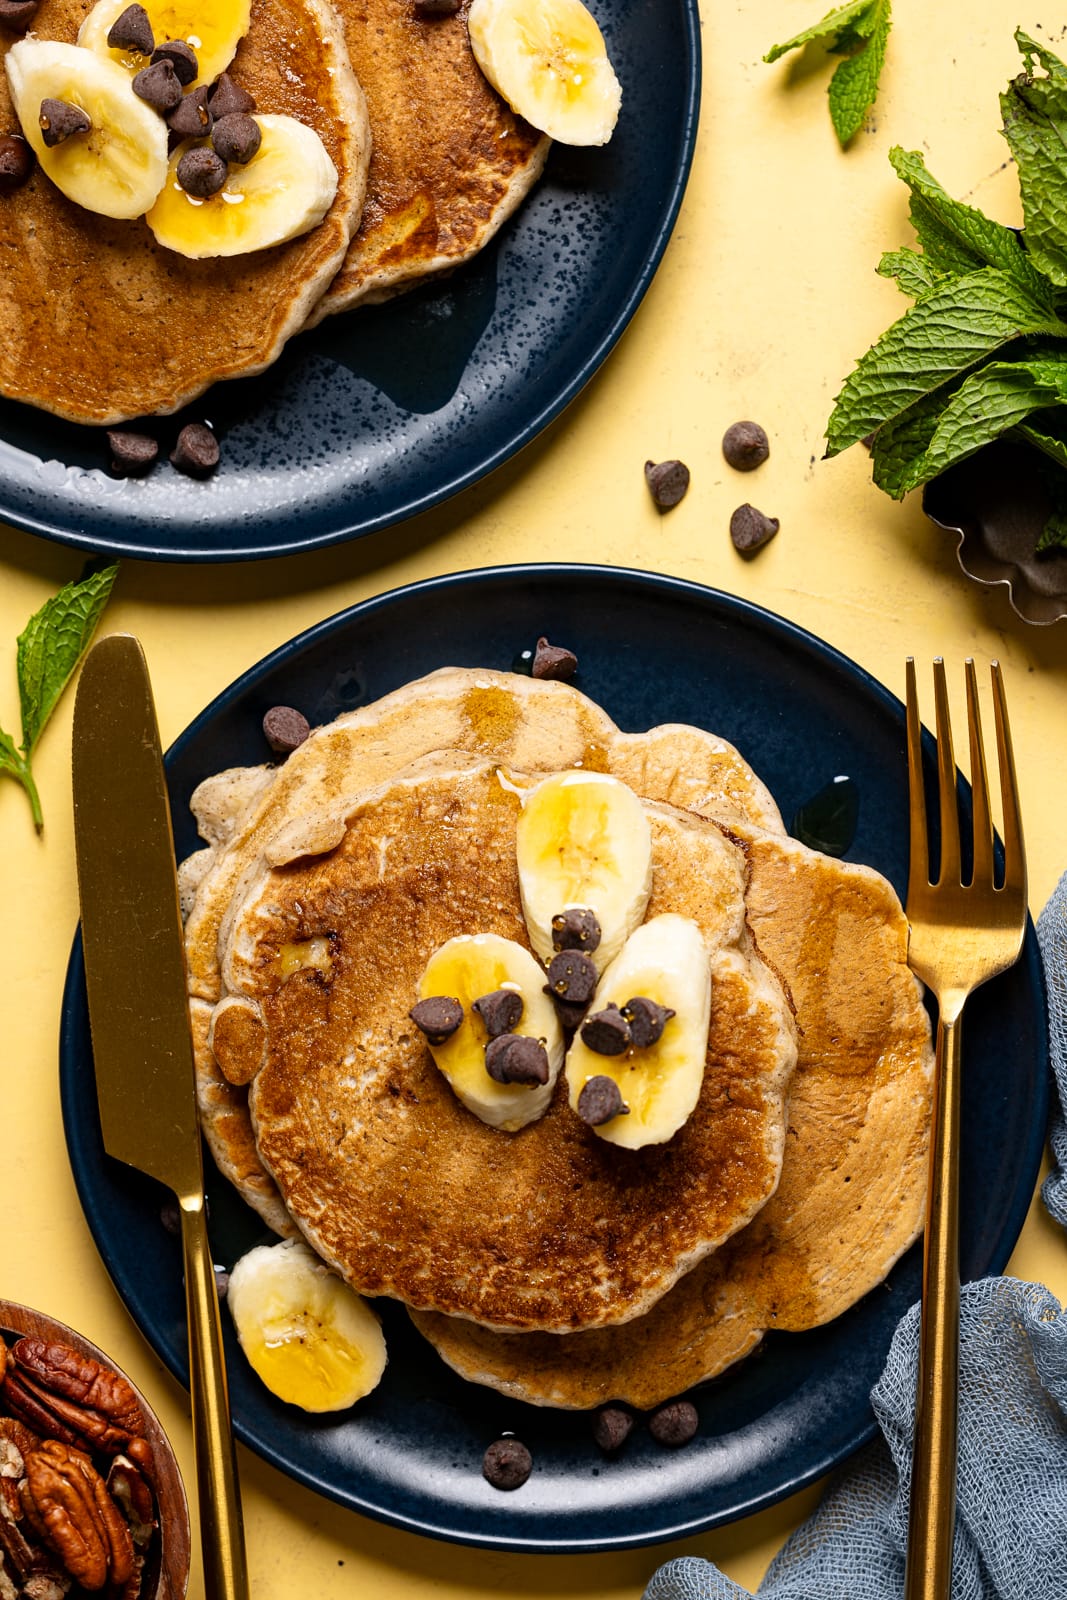 Pancakes on a blue plate with sliced bananas and chocolate chips and a knife + fork.